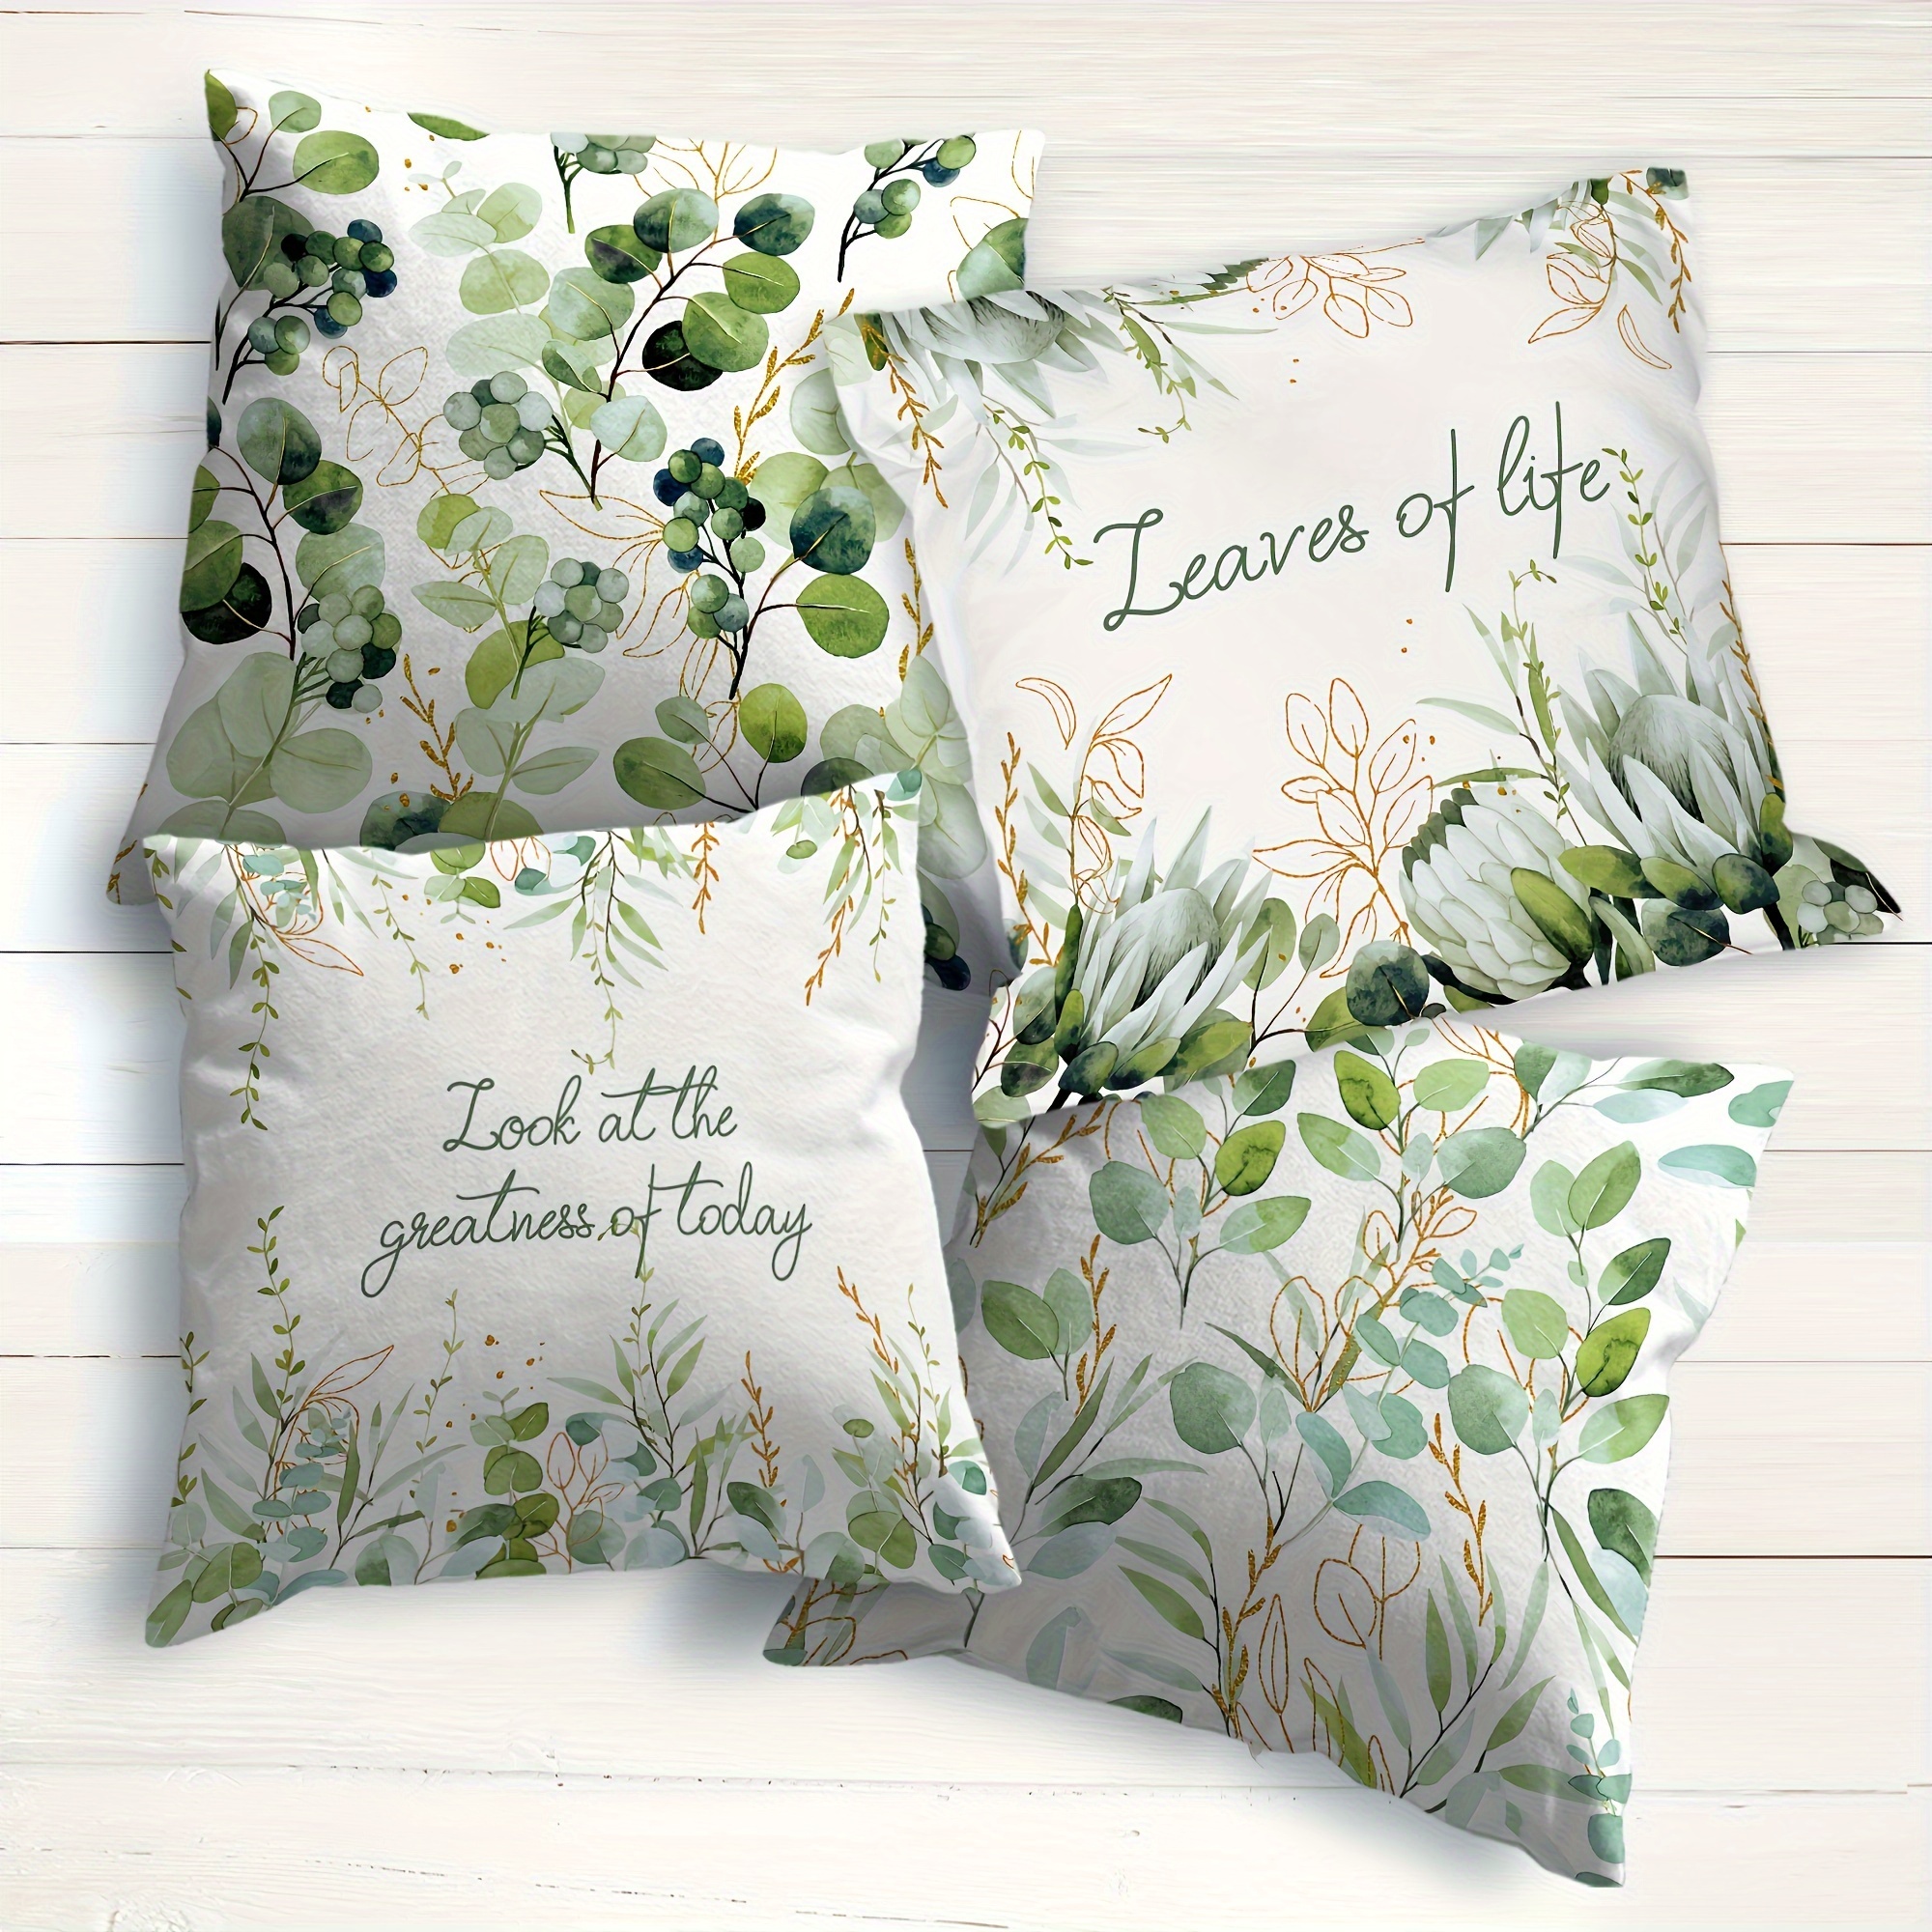 

Set Of 4 Waterproof Twill Throw Pillow Covers - Rustic Floral & Leaf Design, Zip Closure, Machine Washable - Perfect For Patio, Garden Furniture, And Home Decor - 18x18 Inches